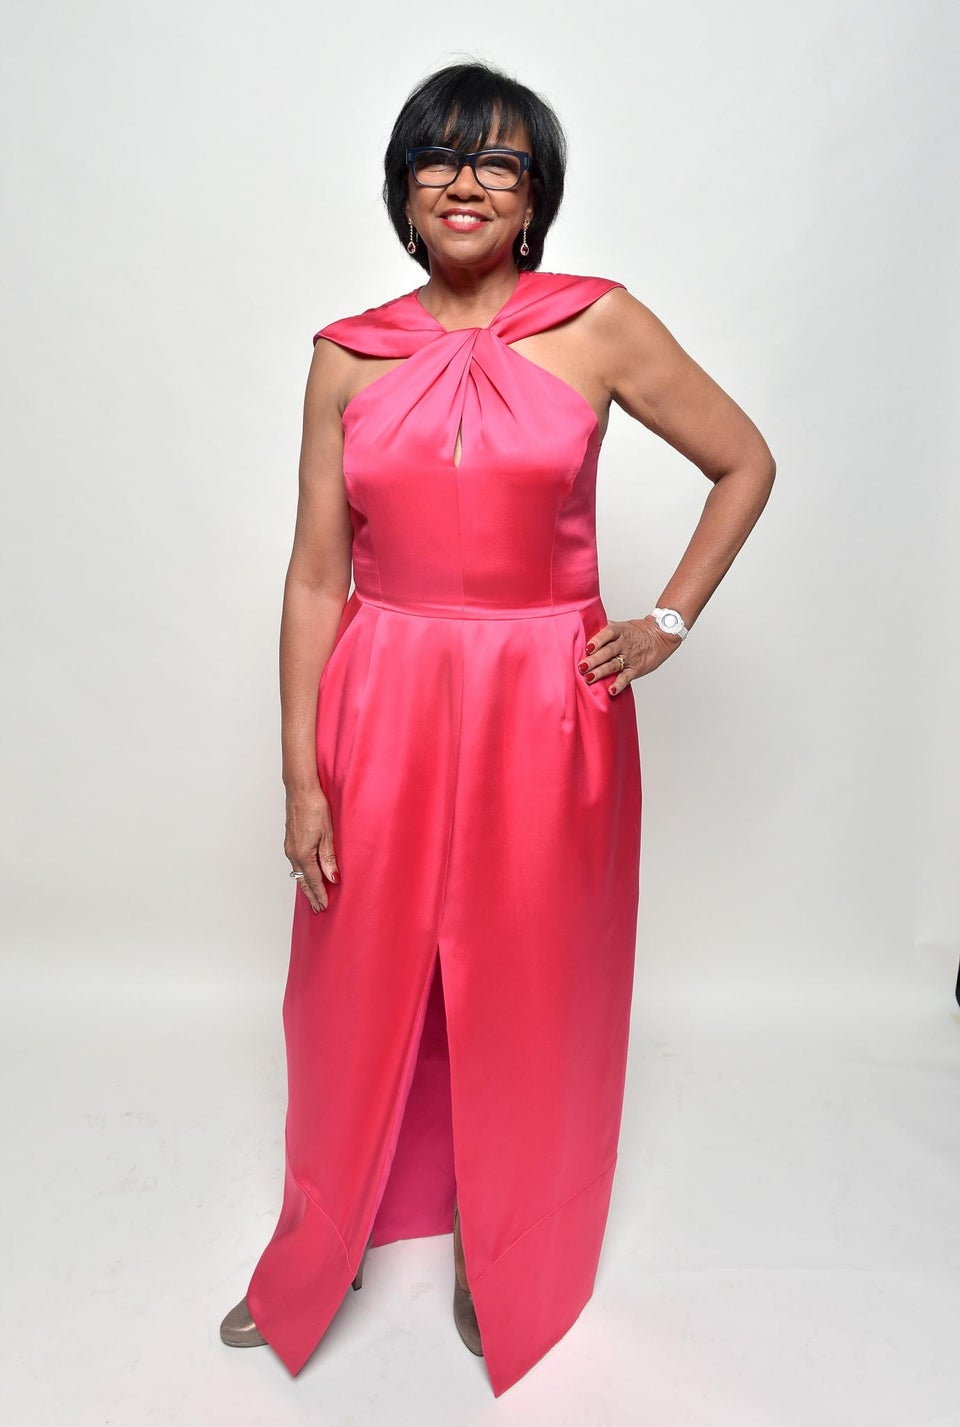 5 Things to Know About ESSENCE ‘Black Women in Hollywood’ Honoree, Cheryl Boone Isaacs